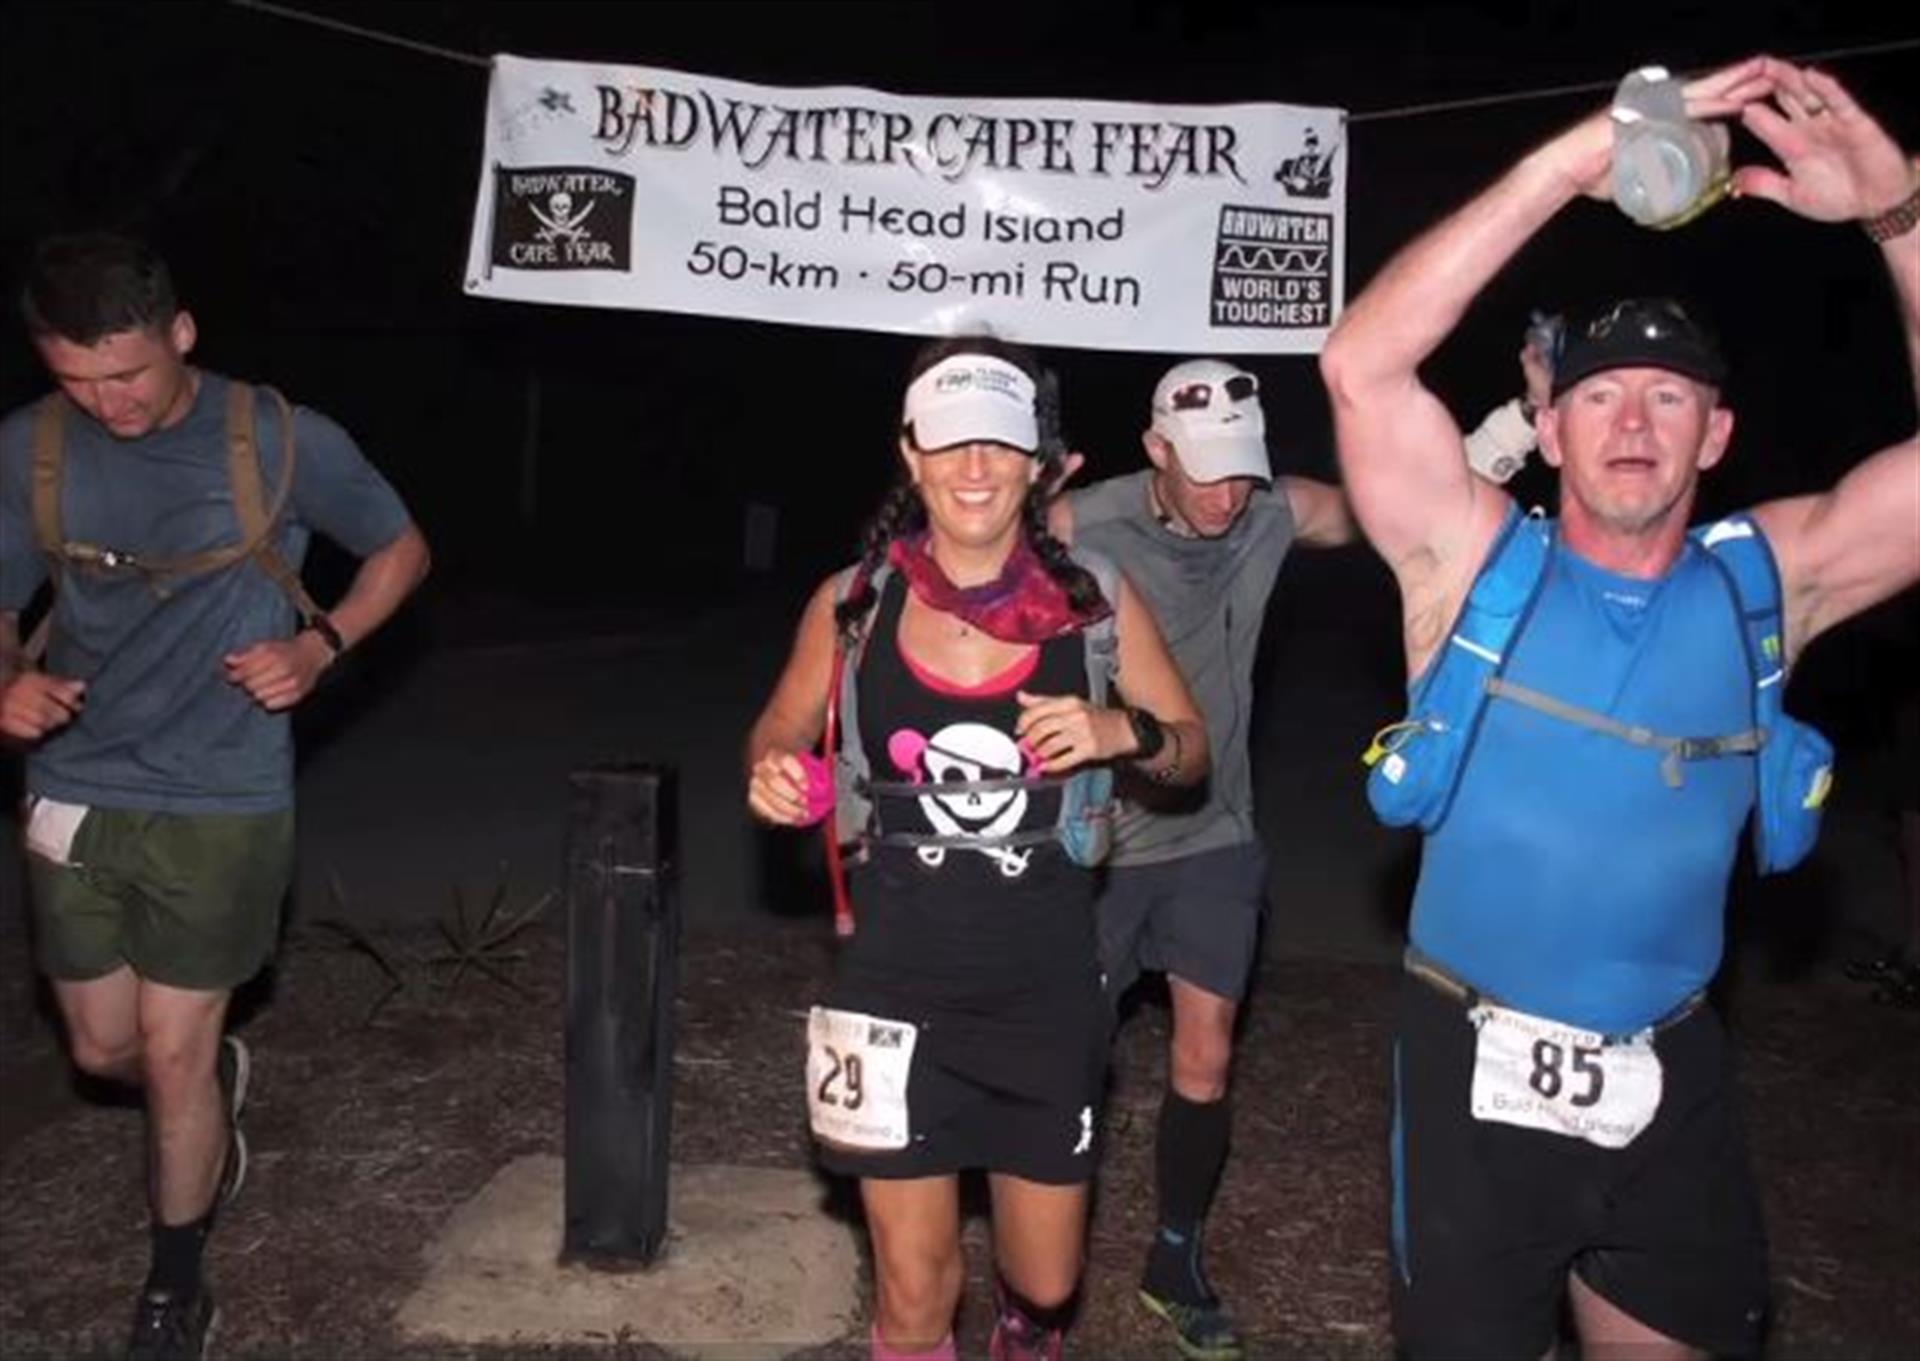 Badwater Cape Fear Image.JPG